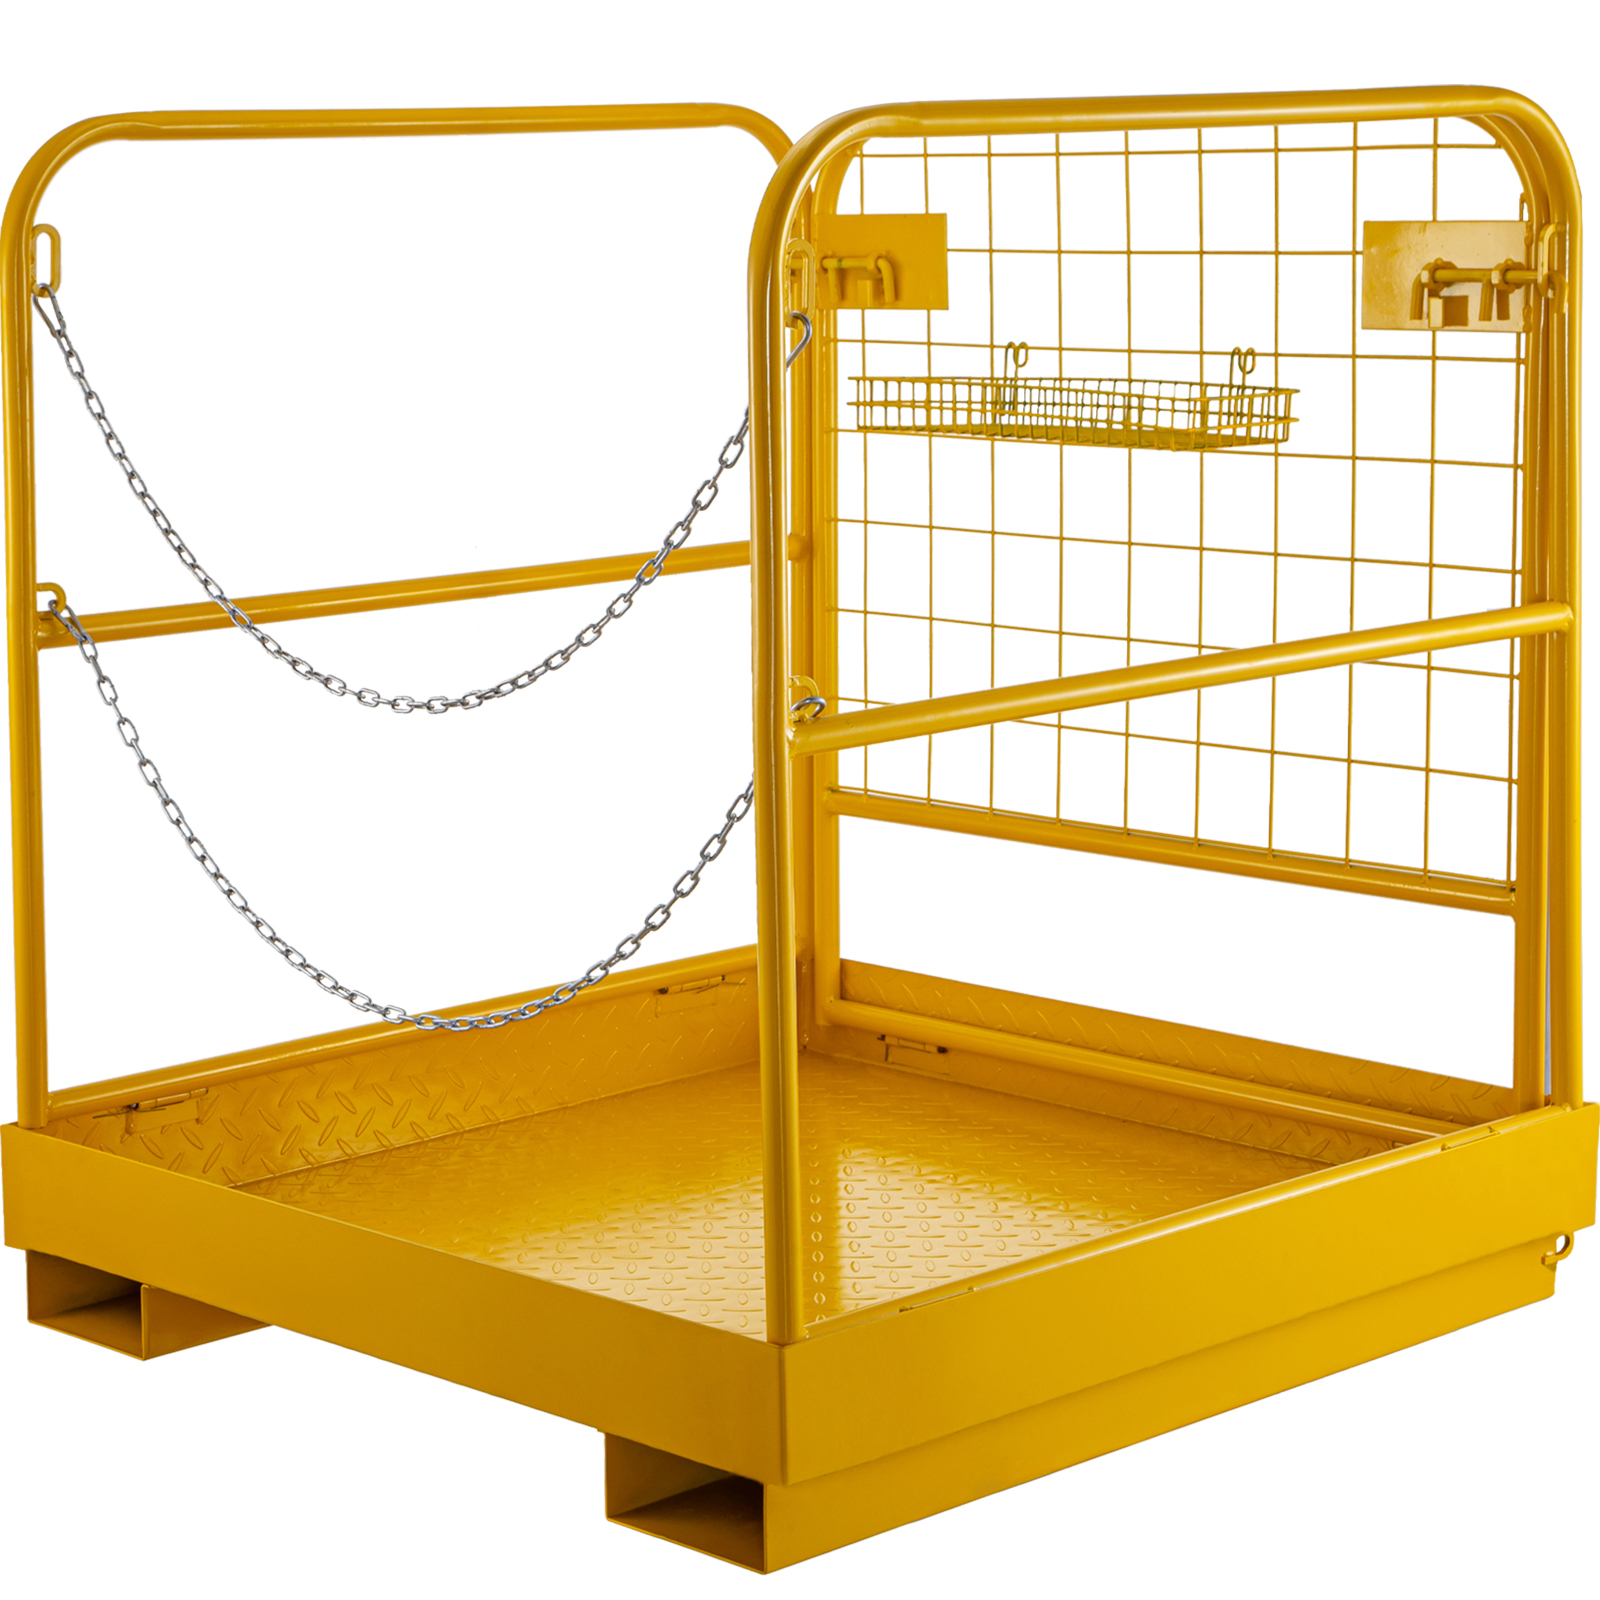 36''*36'' Forklift Work Platform Safety Cage Heavy Duty Durable 900lbs Capacity от Vevor Many GEOs